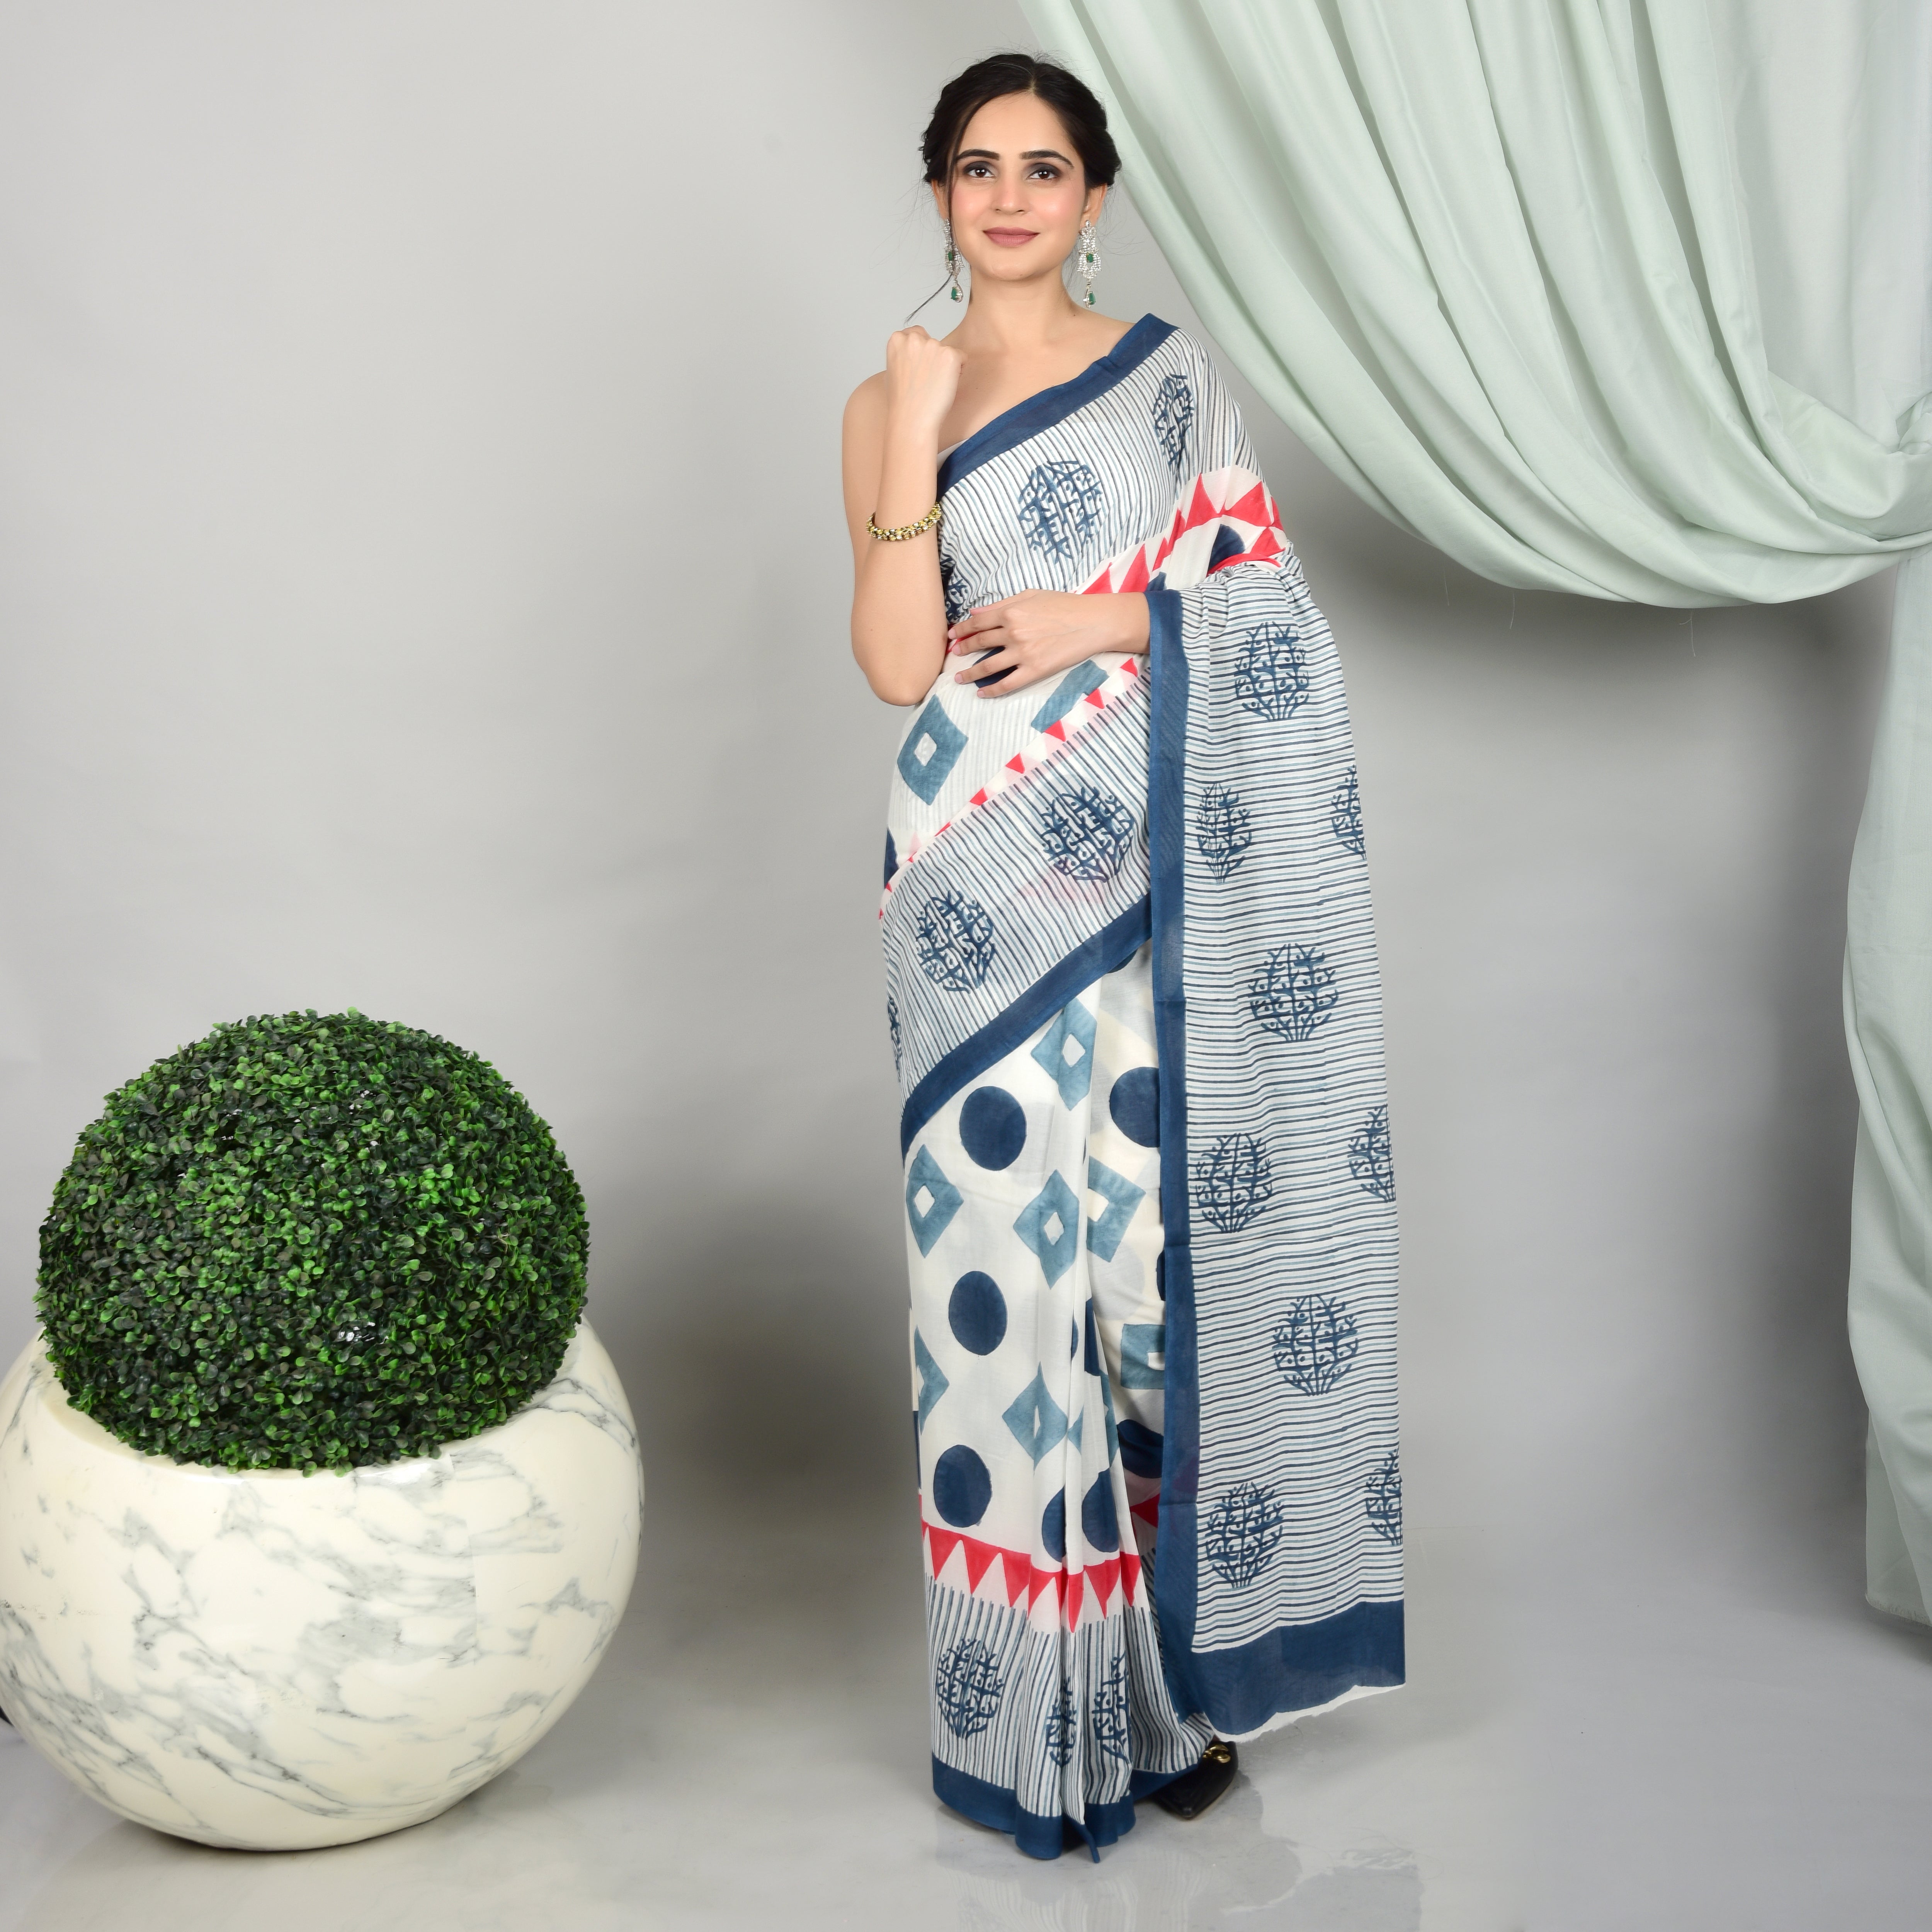 Traditional and Hand Painted Kerala Cotton Sarees – AEVUM